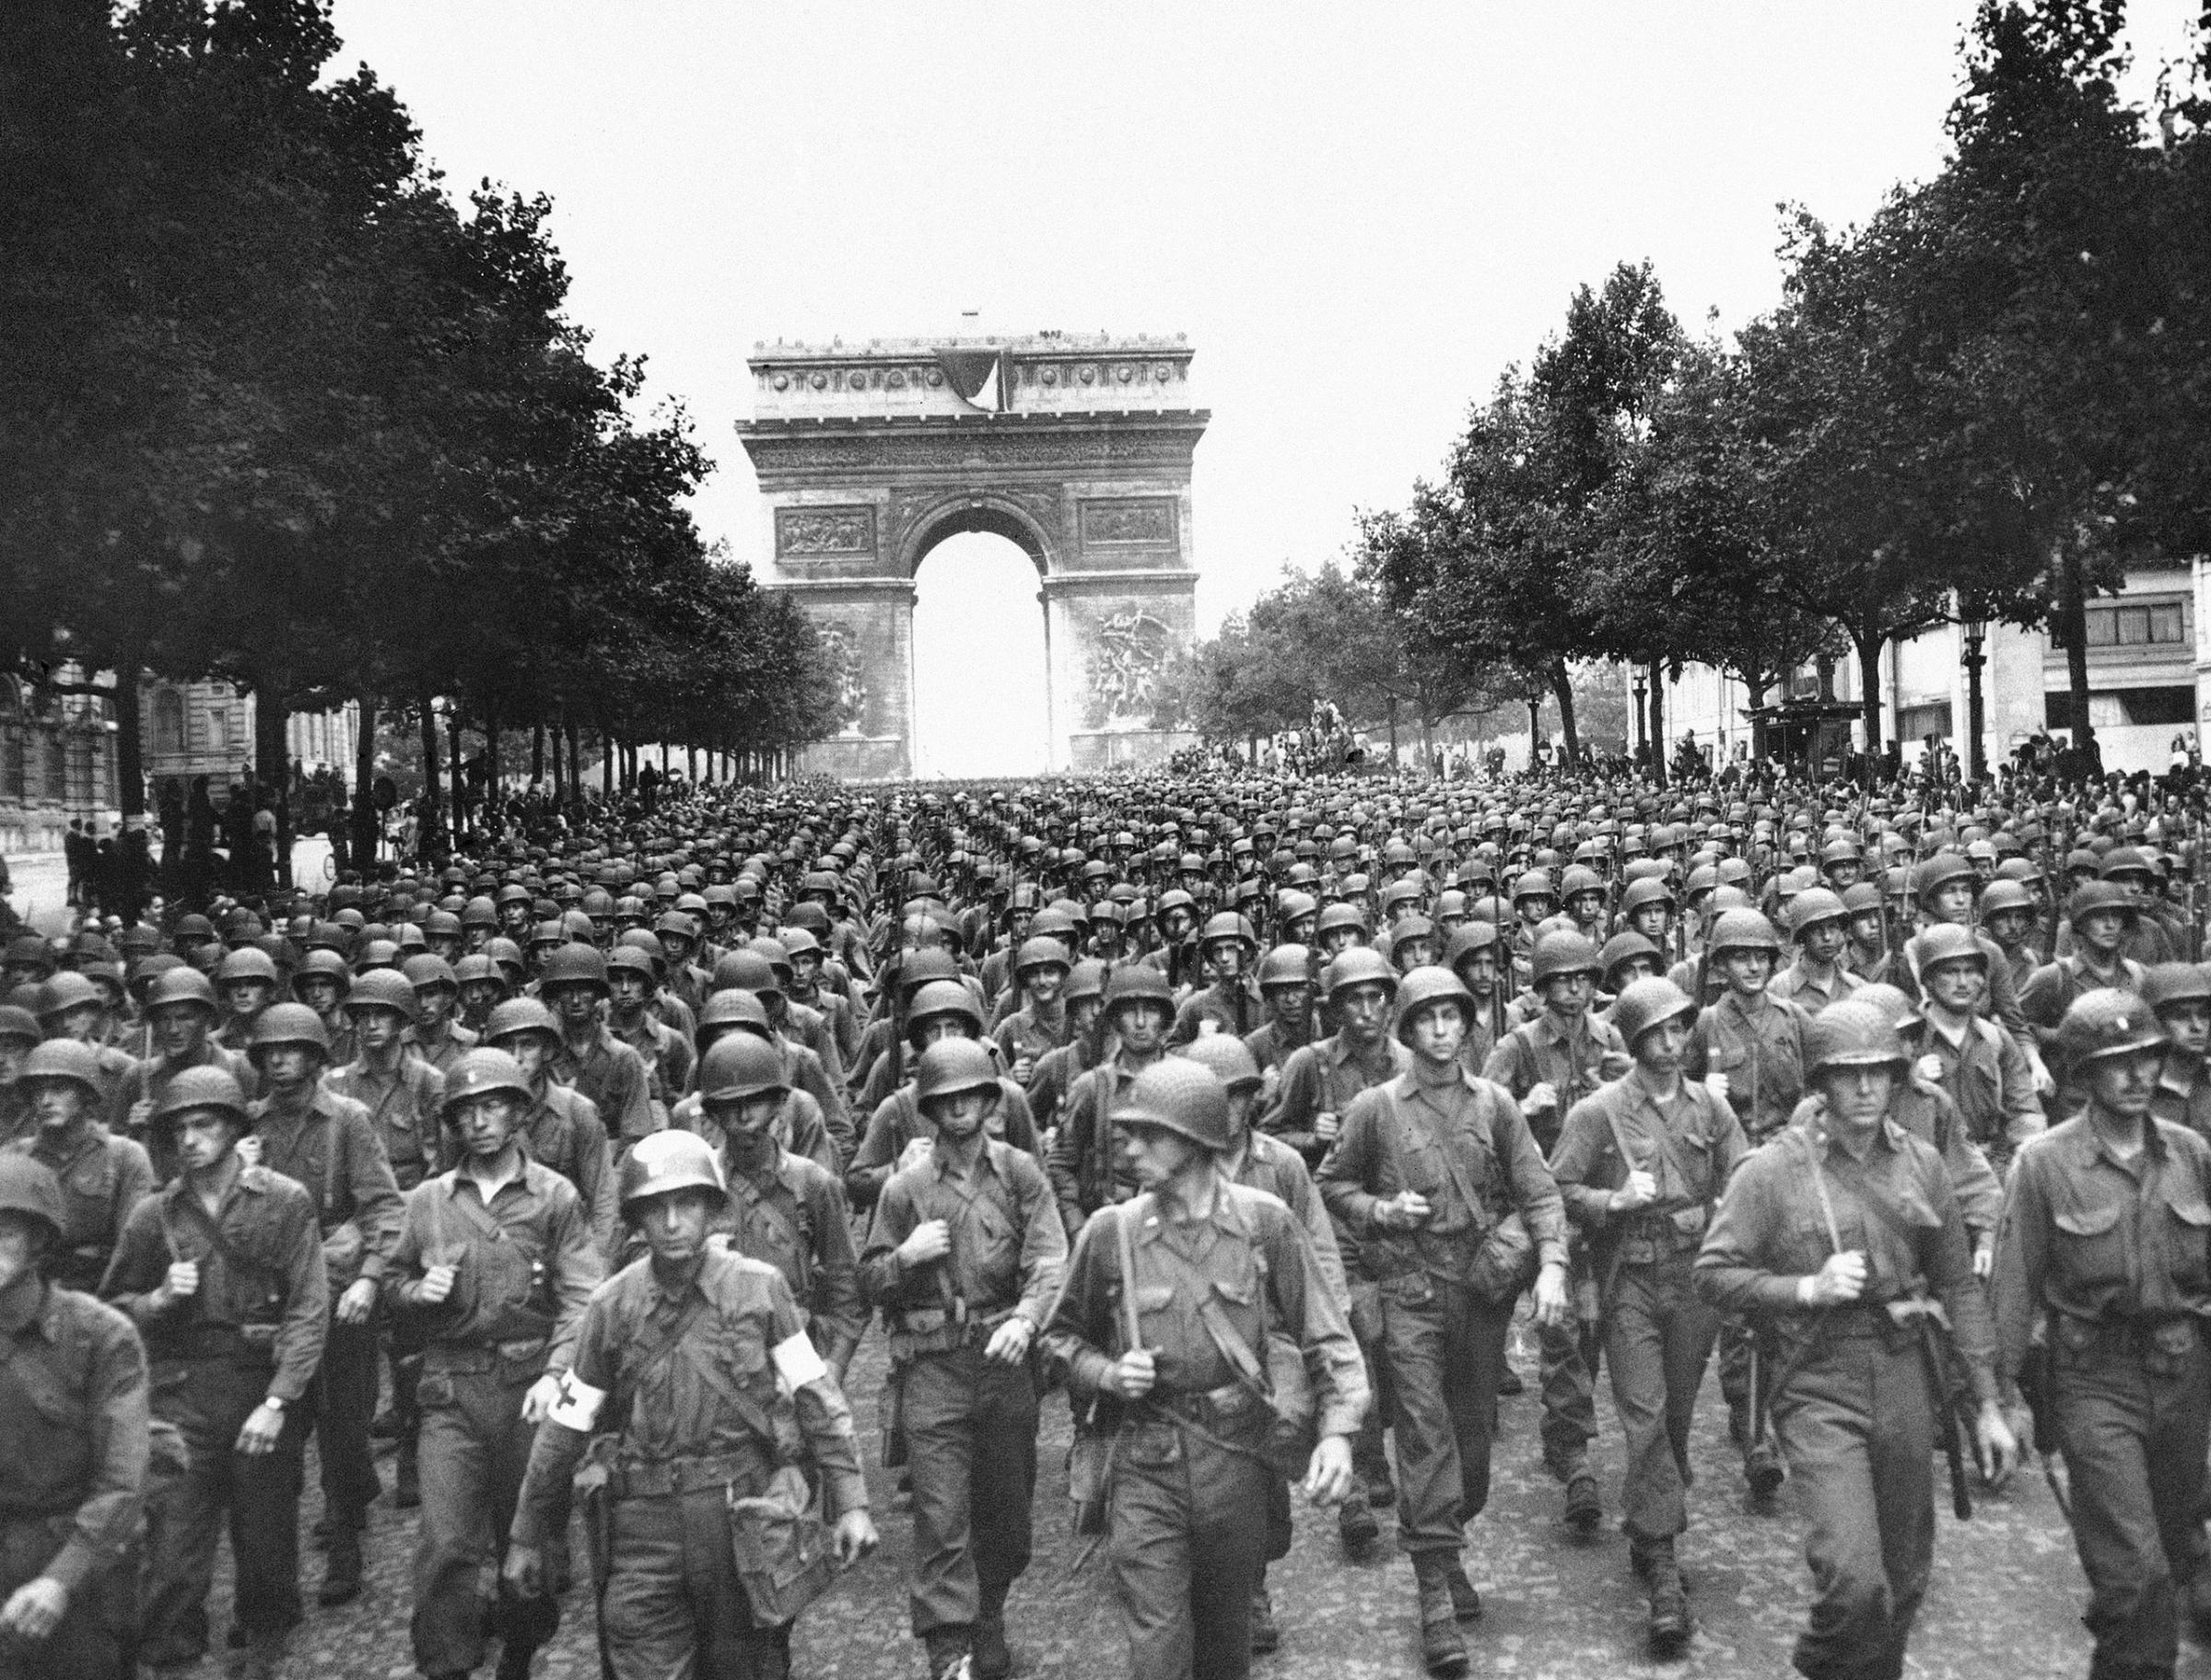 U.S. soldiers of Pennsylvania's 28th Infantry Division march along the Champs Elysees, the Arc de Triomphe in the background, on Aug. 29, 1944, four days after the liberation of Paris during WWII.